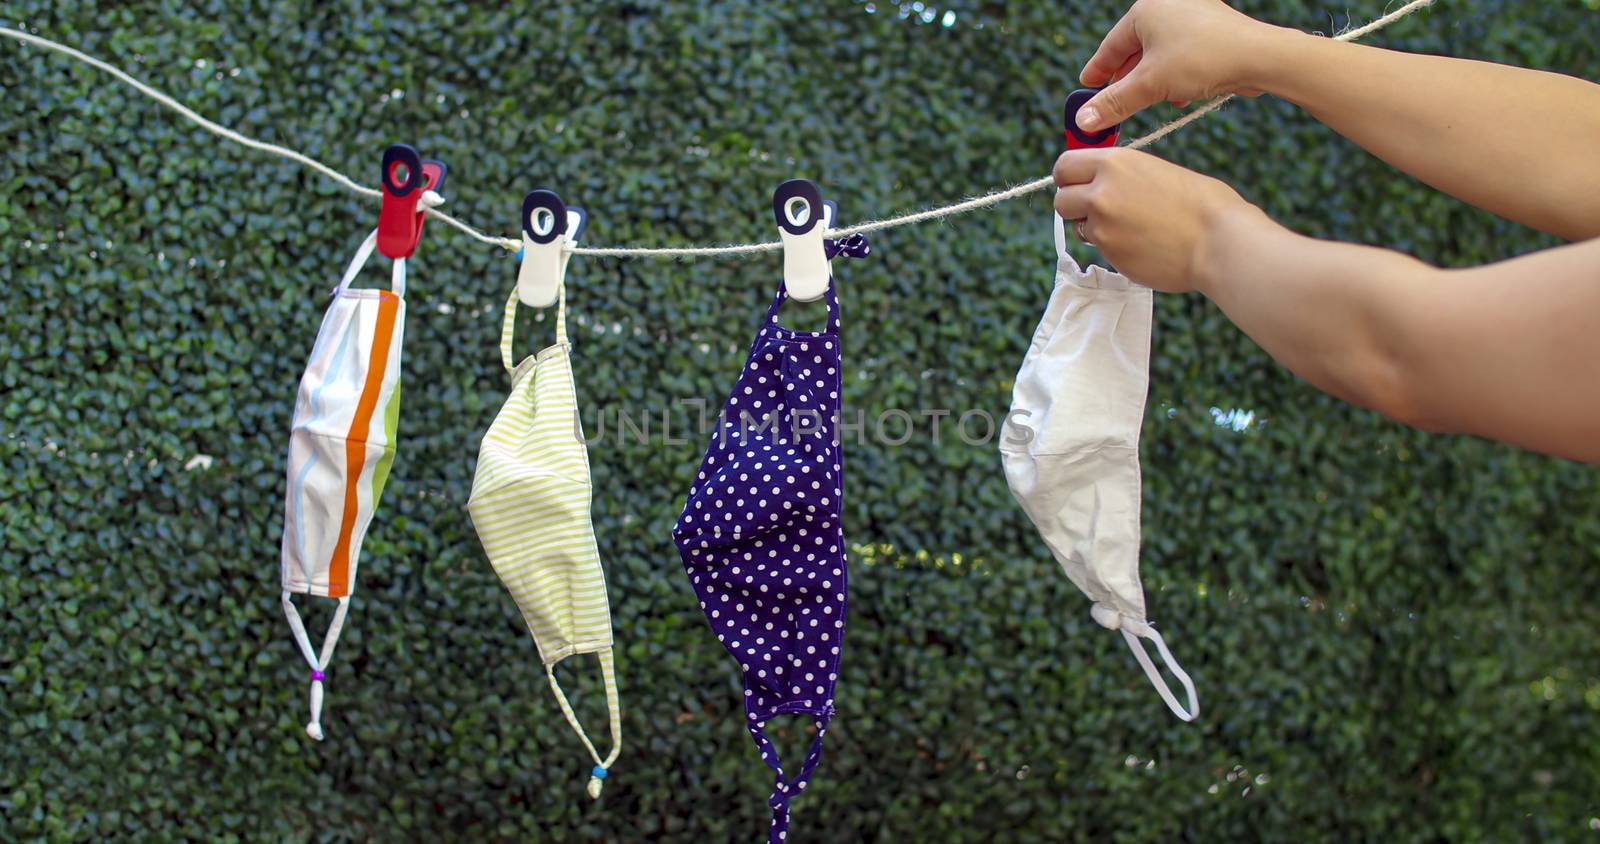 A person Drying outside reusable family face masks, hang on a clothesline nylon rope with clothespins.